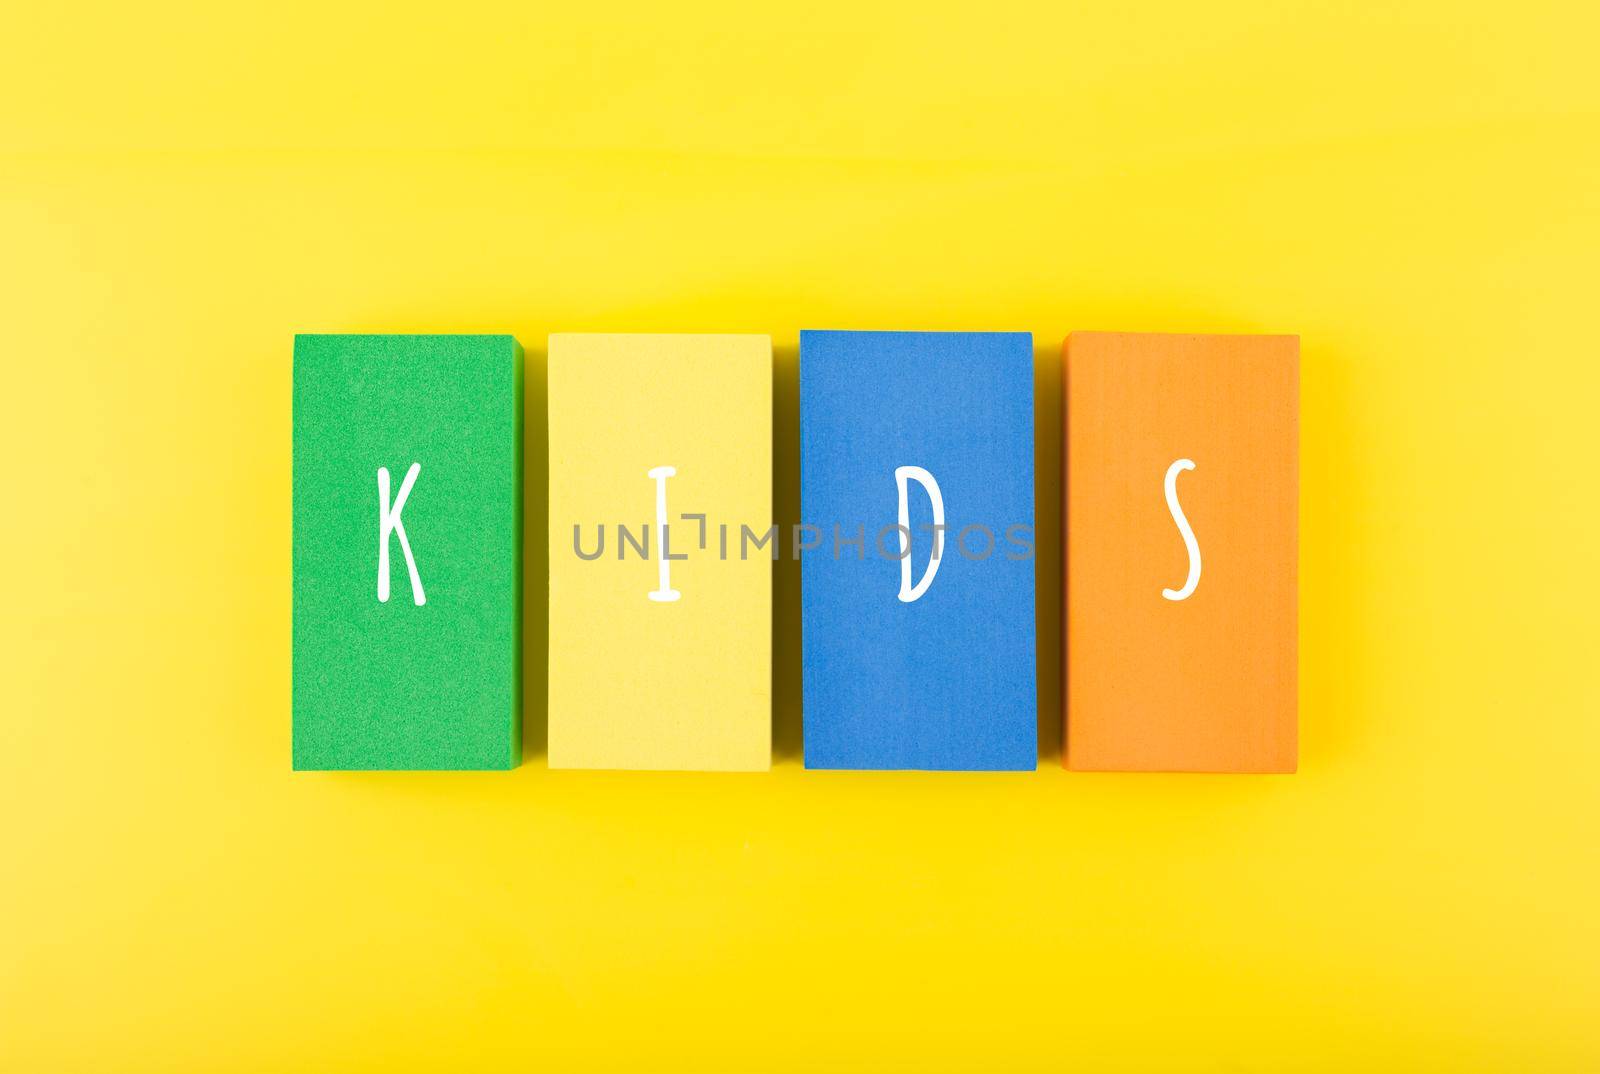 Word kids on colorful rectangles against bright yellow background by Senorina_Irina